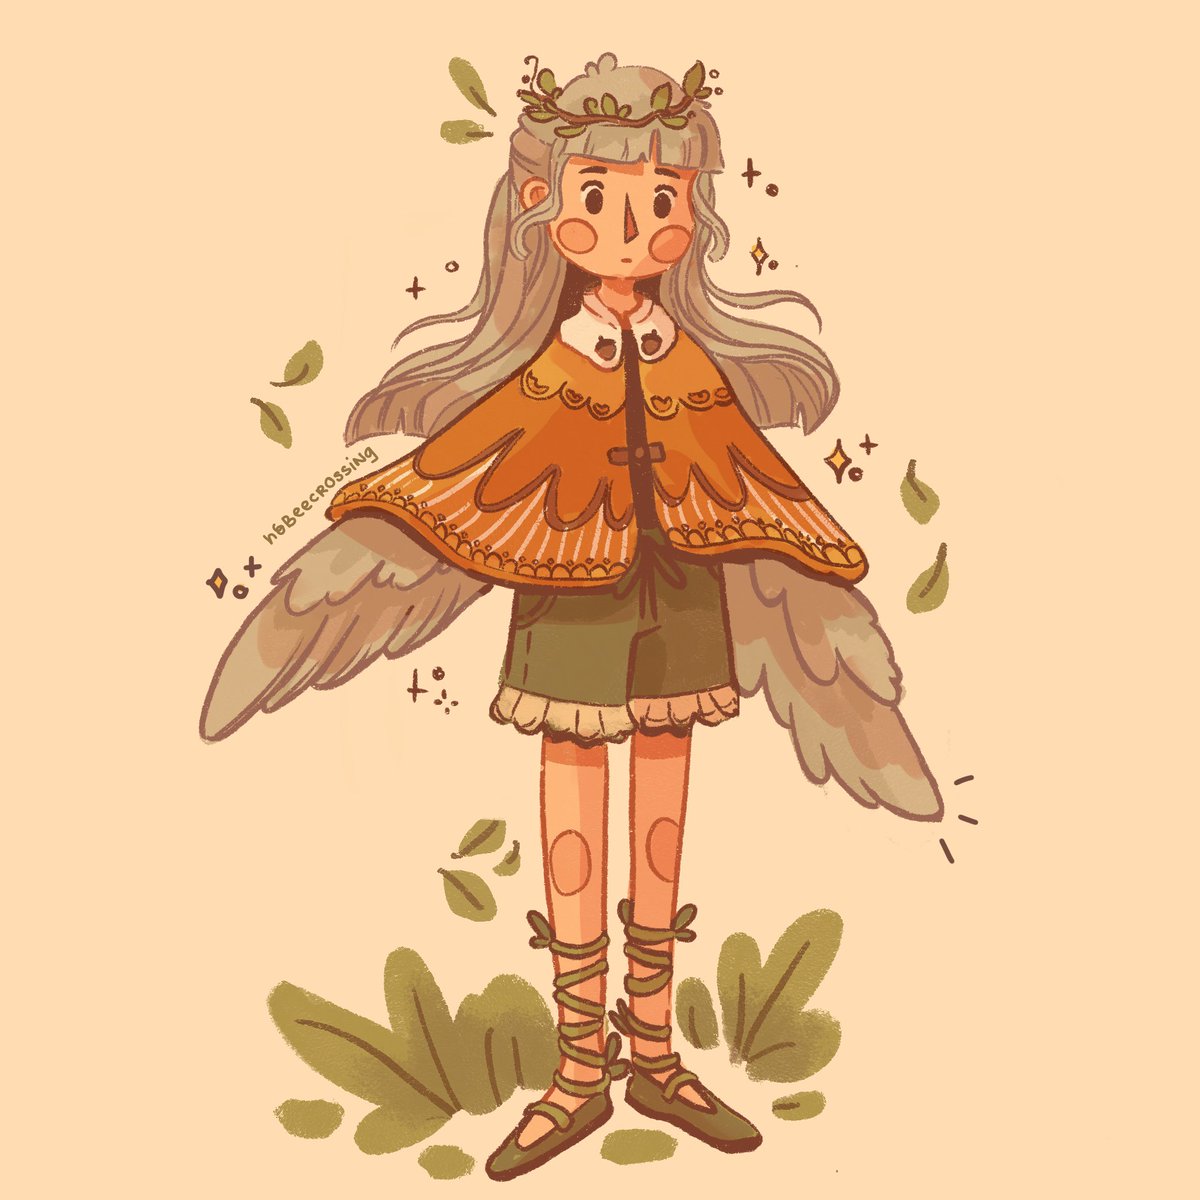 Ingrid Meet Robin The Avian Spirit Of The Forest I Created Her For My Dtiys Challenge On Ig Feel Free To Draw Her In Your Own Style